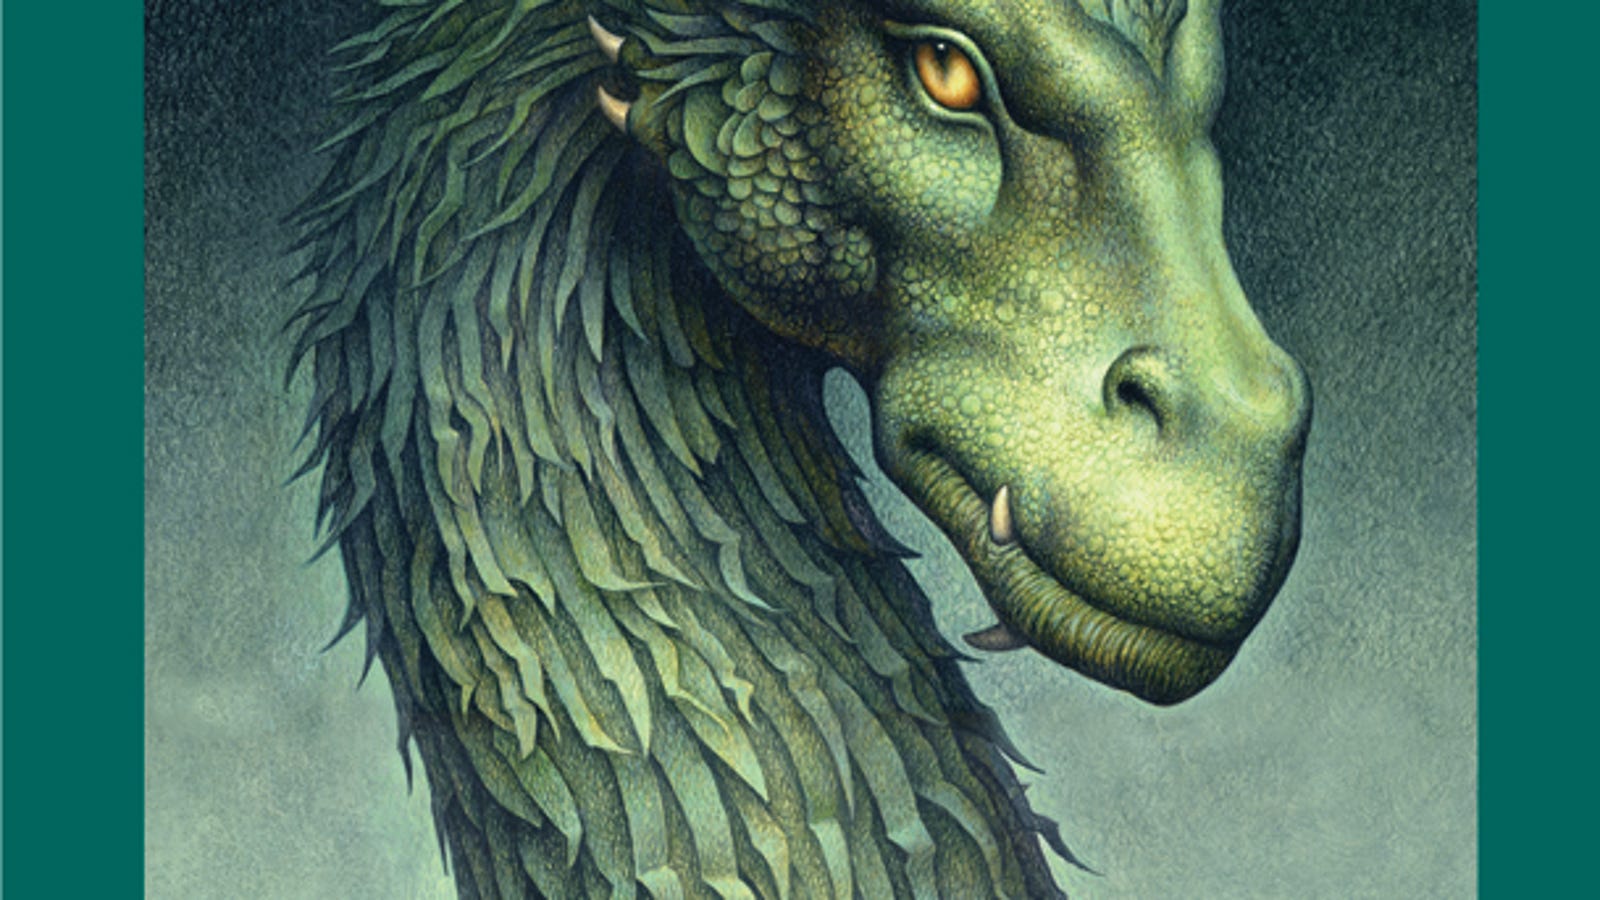 Christopher Paolini's next book project will be science fiction